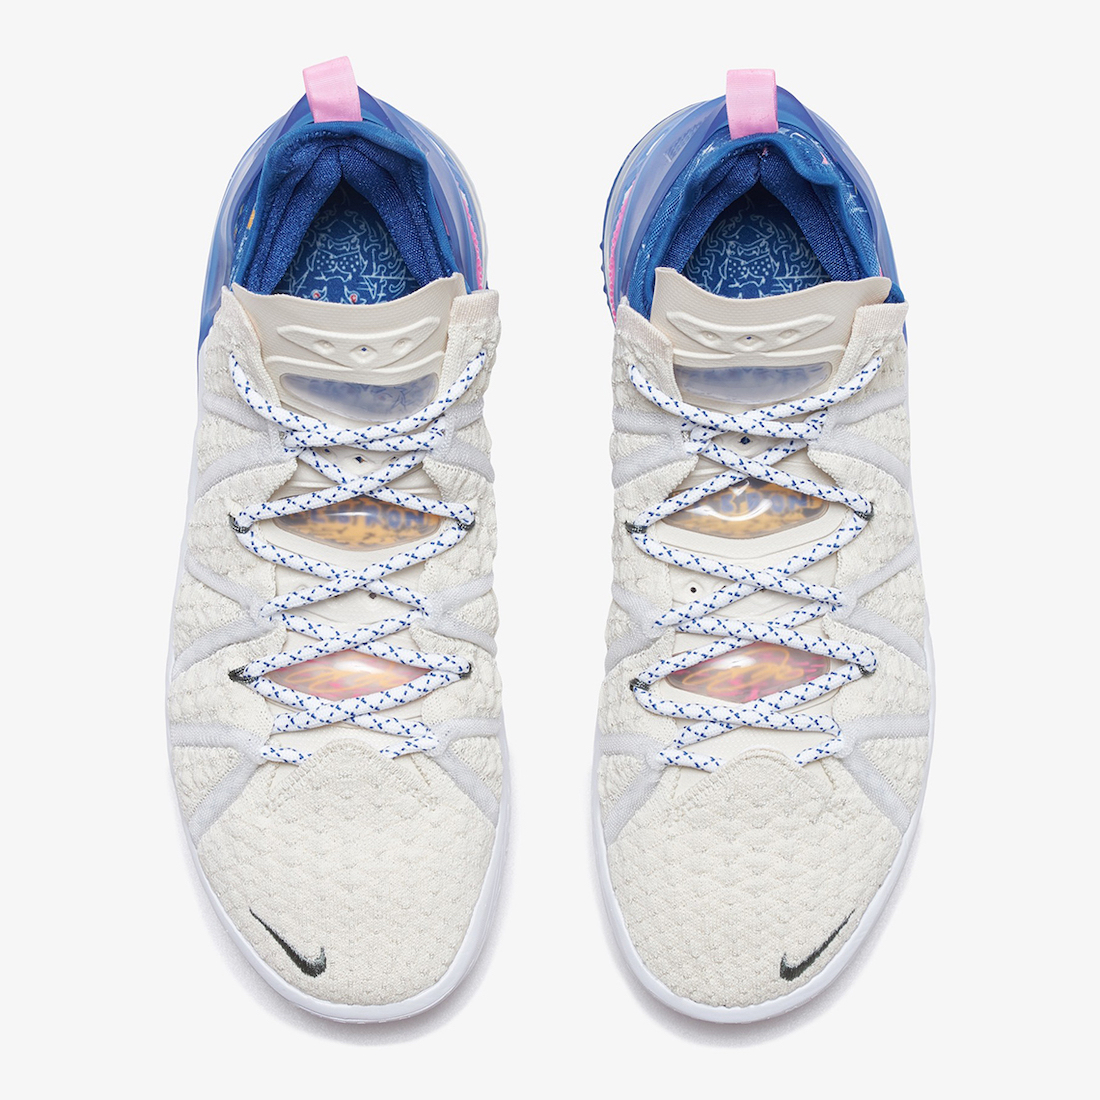 Nike LeBron 18 Los Angeles By Day DB8148 200 Release Date 3